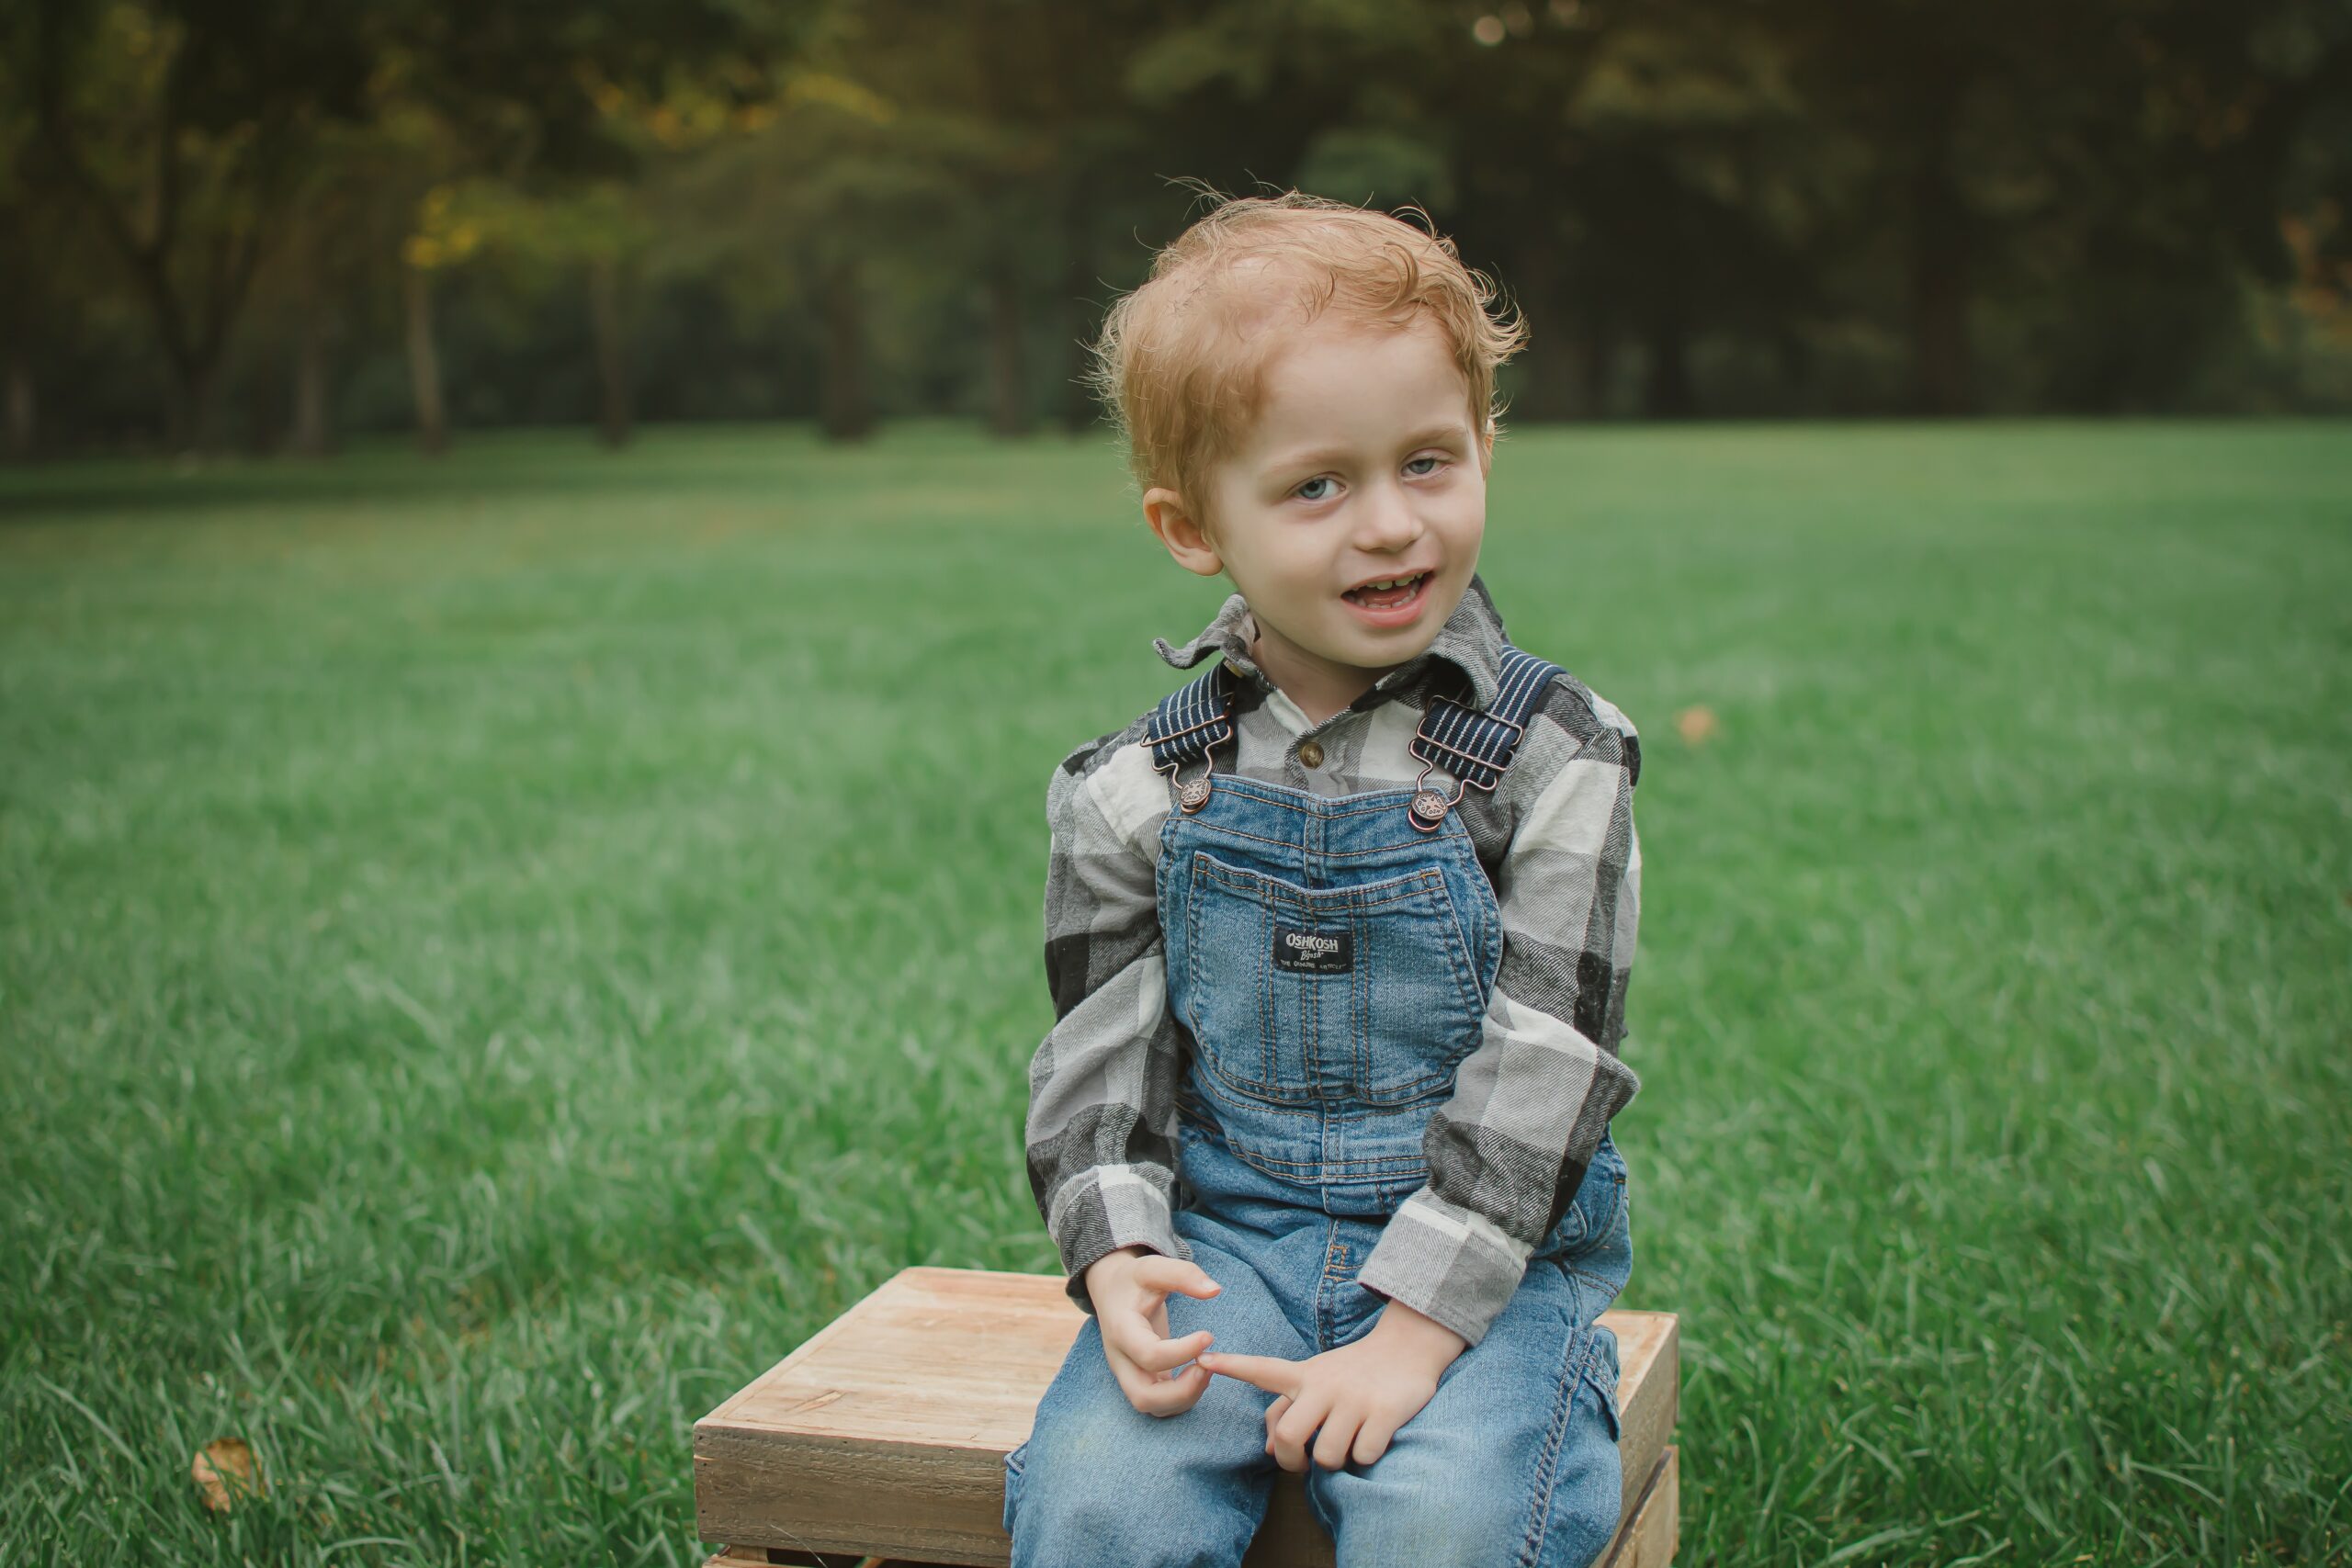 cancer warrior, Sutton, dressed in overalls and sitting on a bench in some grass